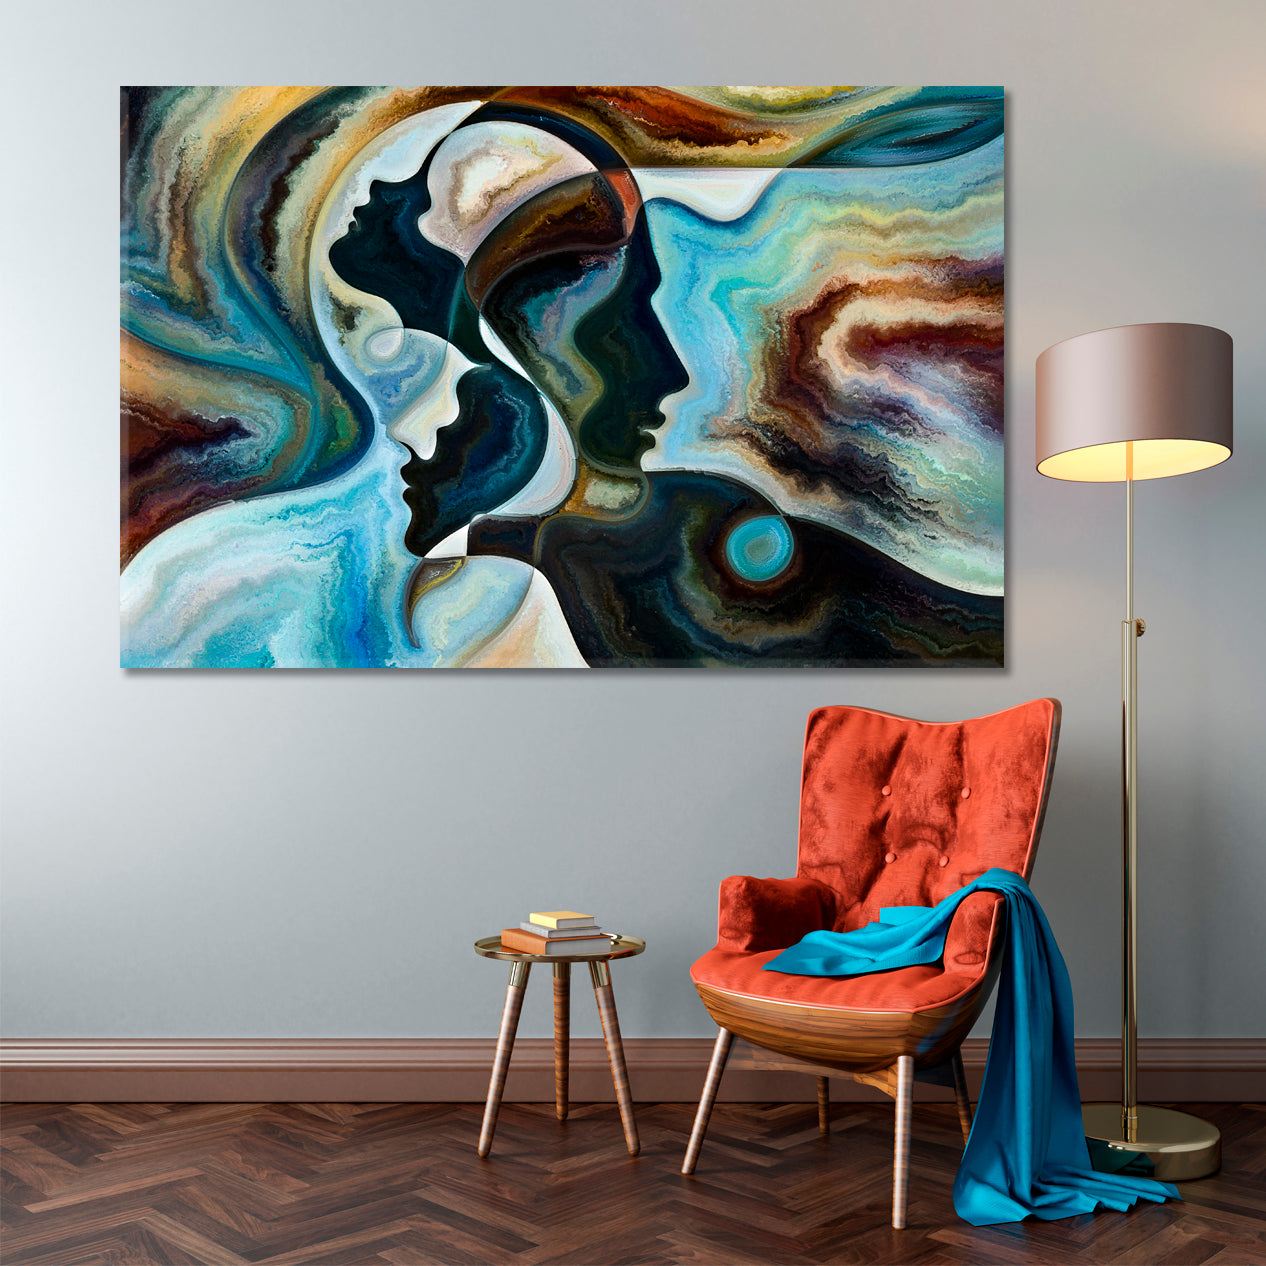 Human Abstract Painting Large Abstract Acrylic Painting On Canvas  Figurative Modern Art | SECRETS OF CONSCIOUSNESS